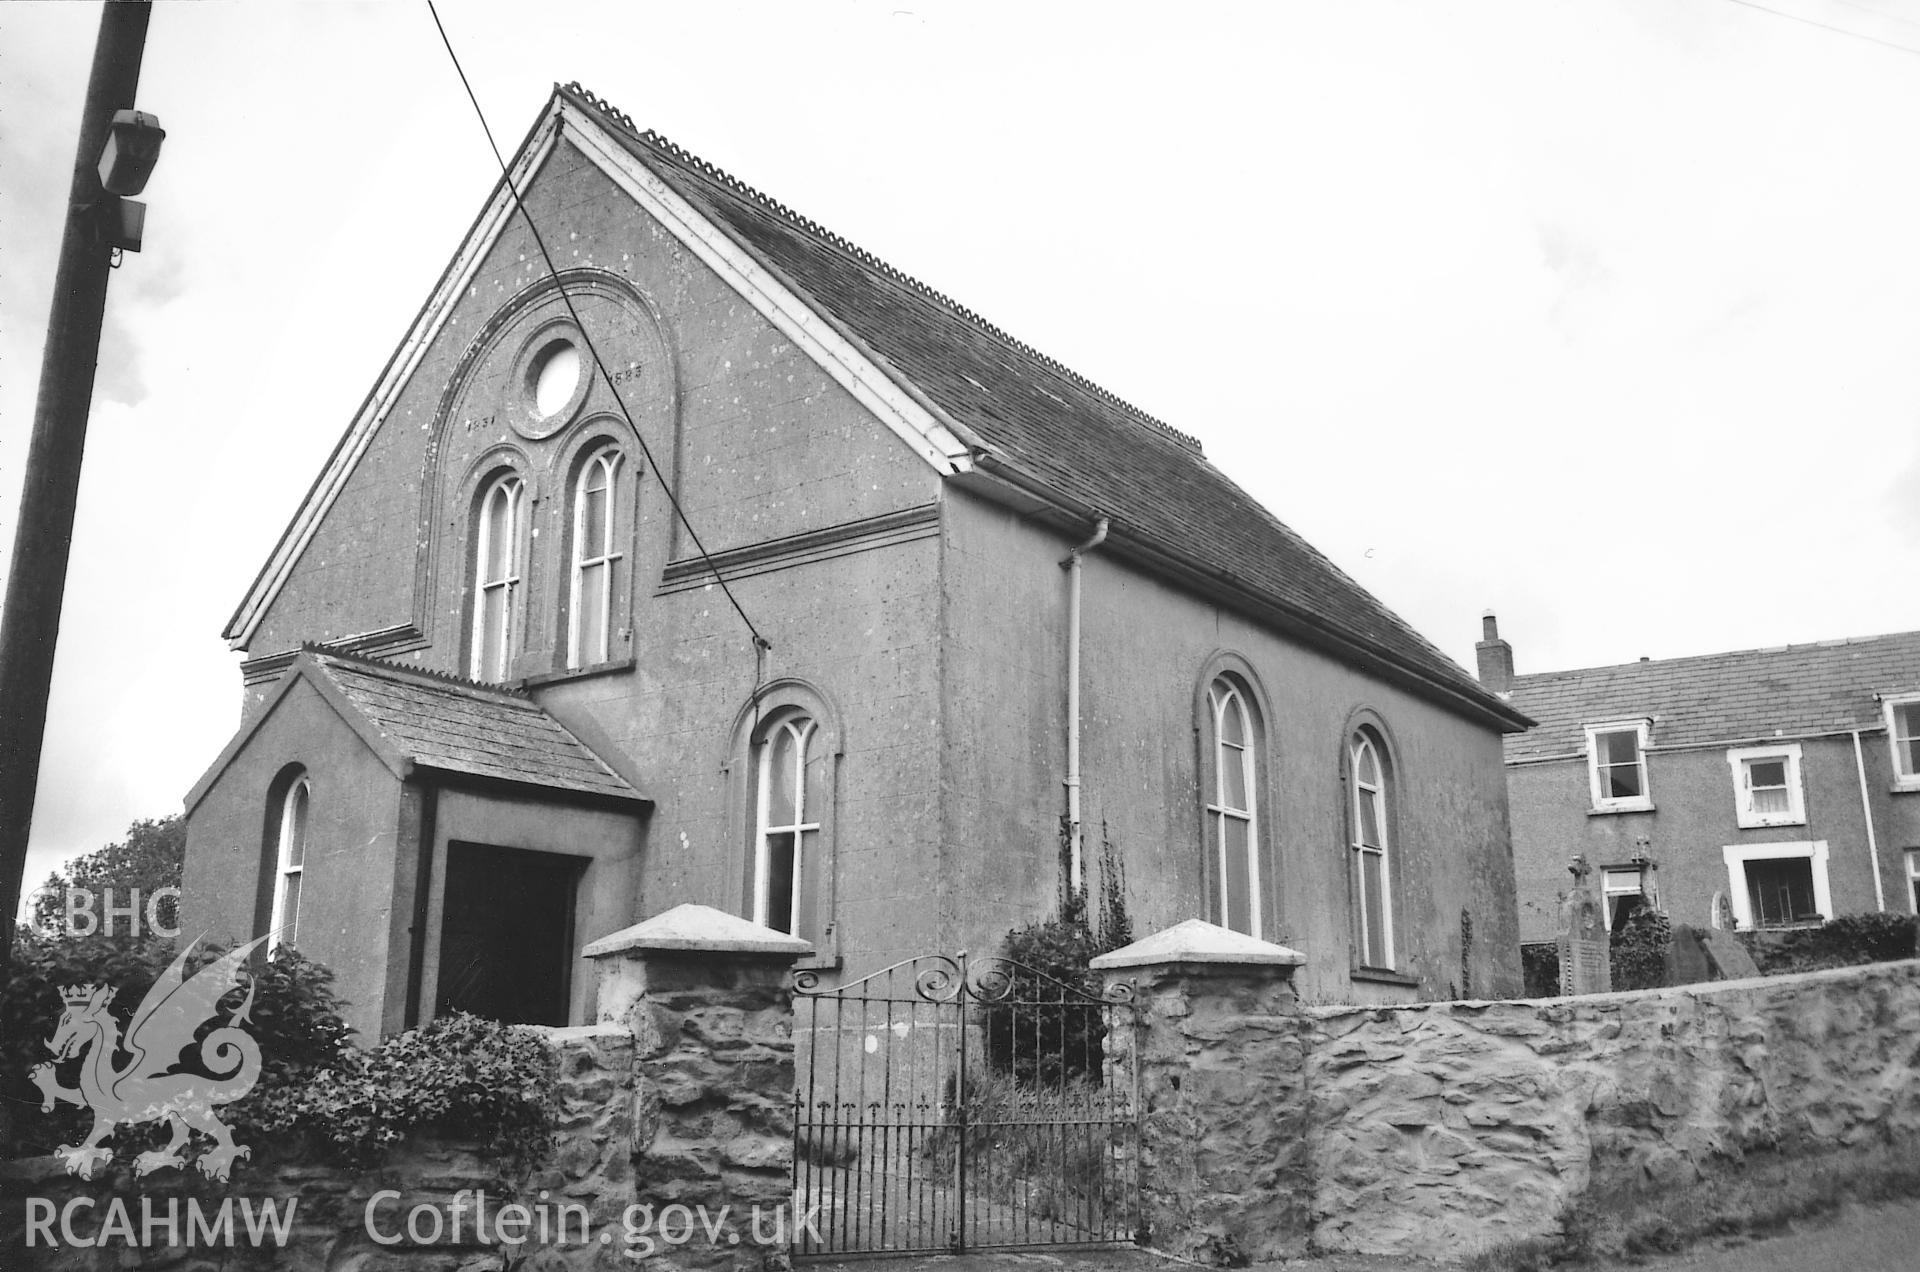 Digital copy of a black and white photograph showing an exterior view of Tabernacle Independent Chapel, Rosemarket, taken by Robert Scourfield, 1995.